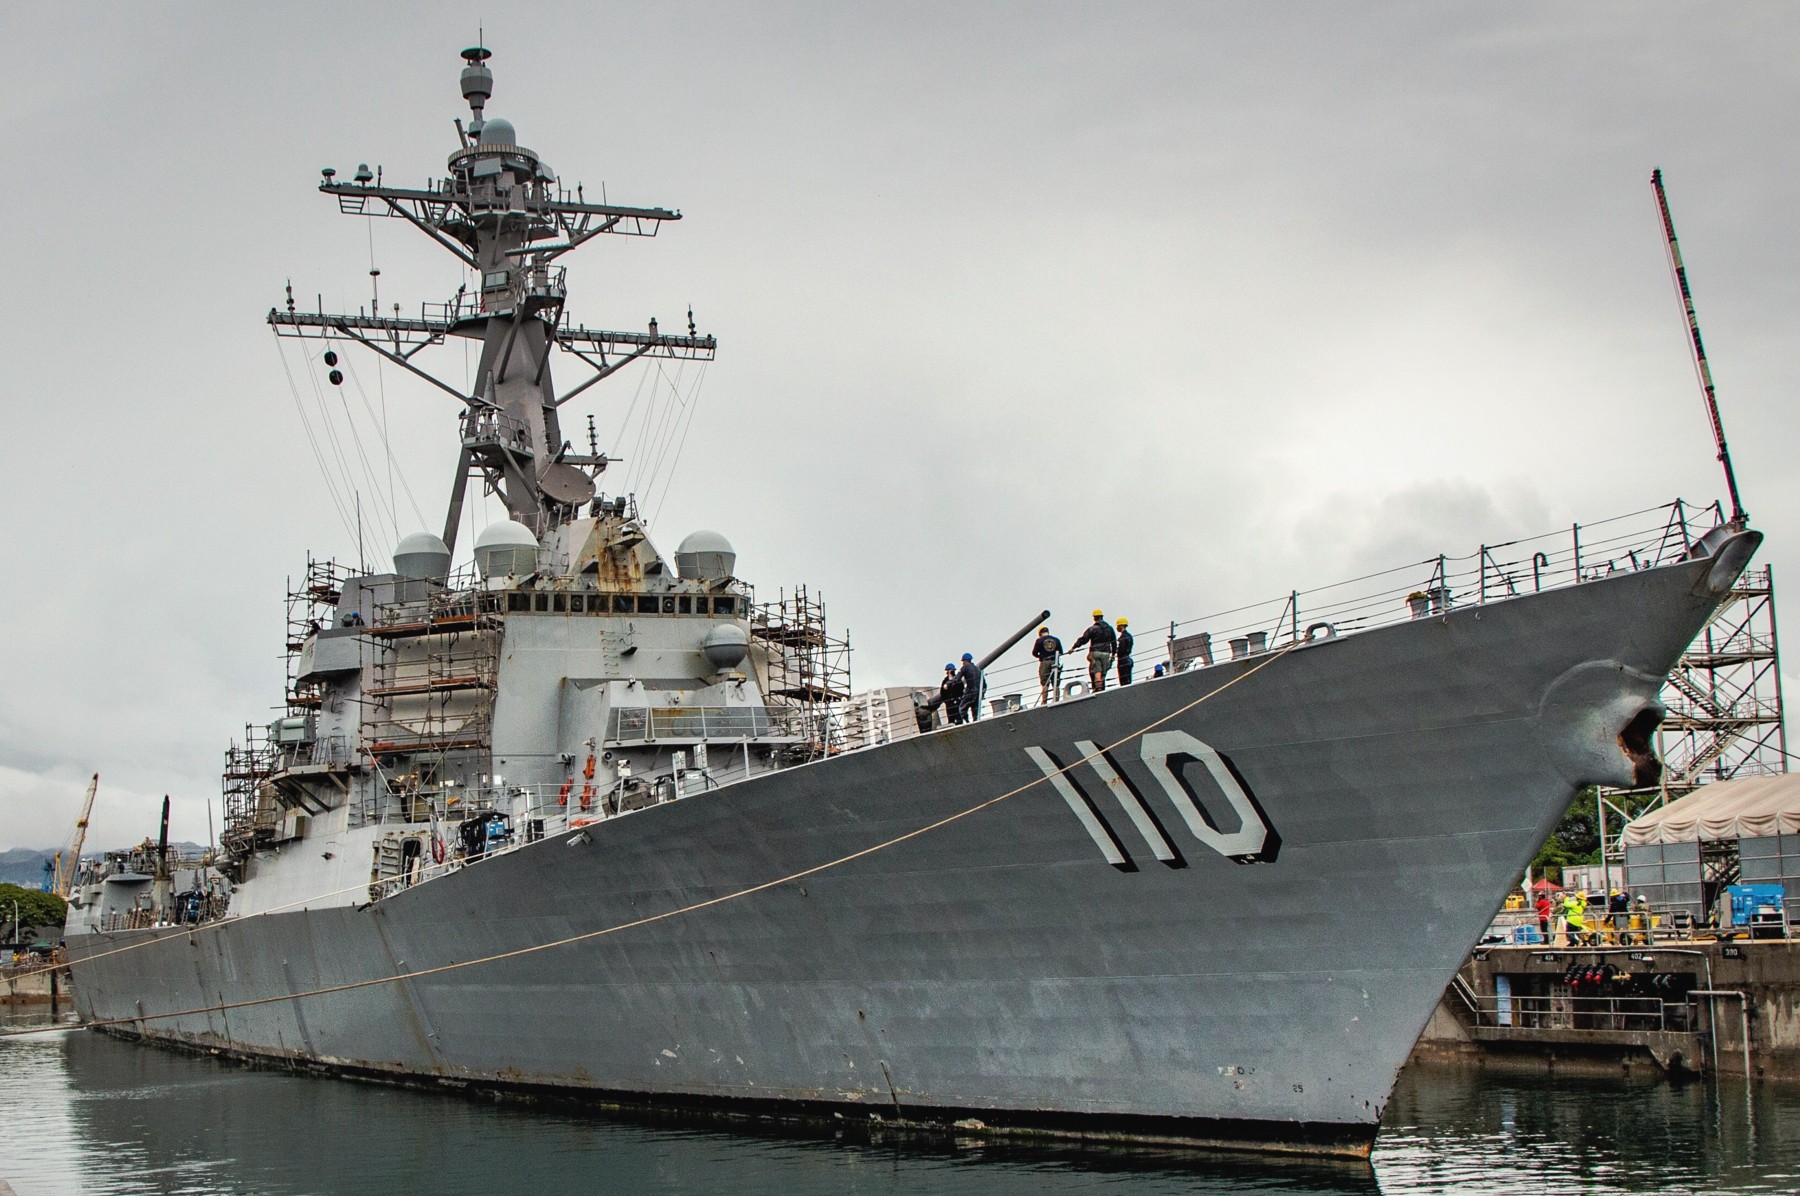 ddg-110 uss william p. lawrence arleigh burke class guided missile destroyer aegis us navy pearl harbor naval shipyard phnsy imf 78